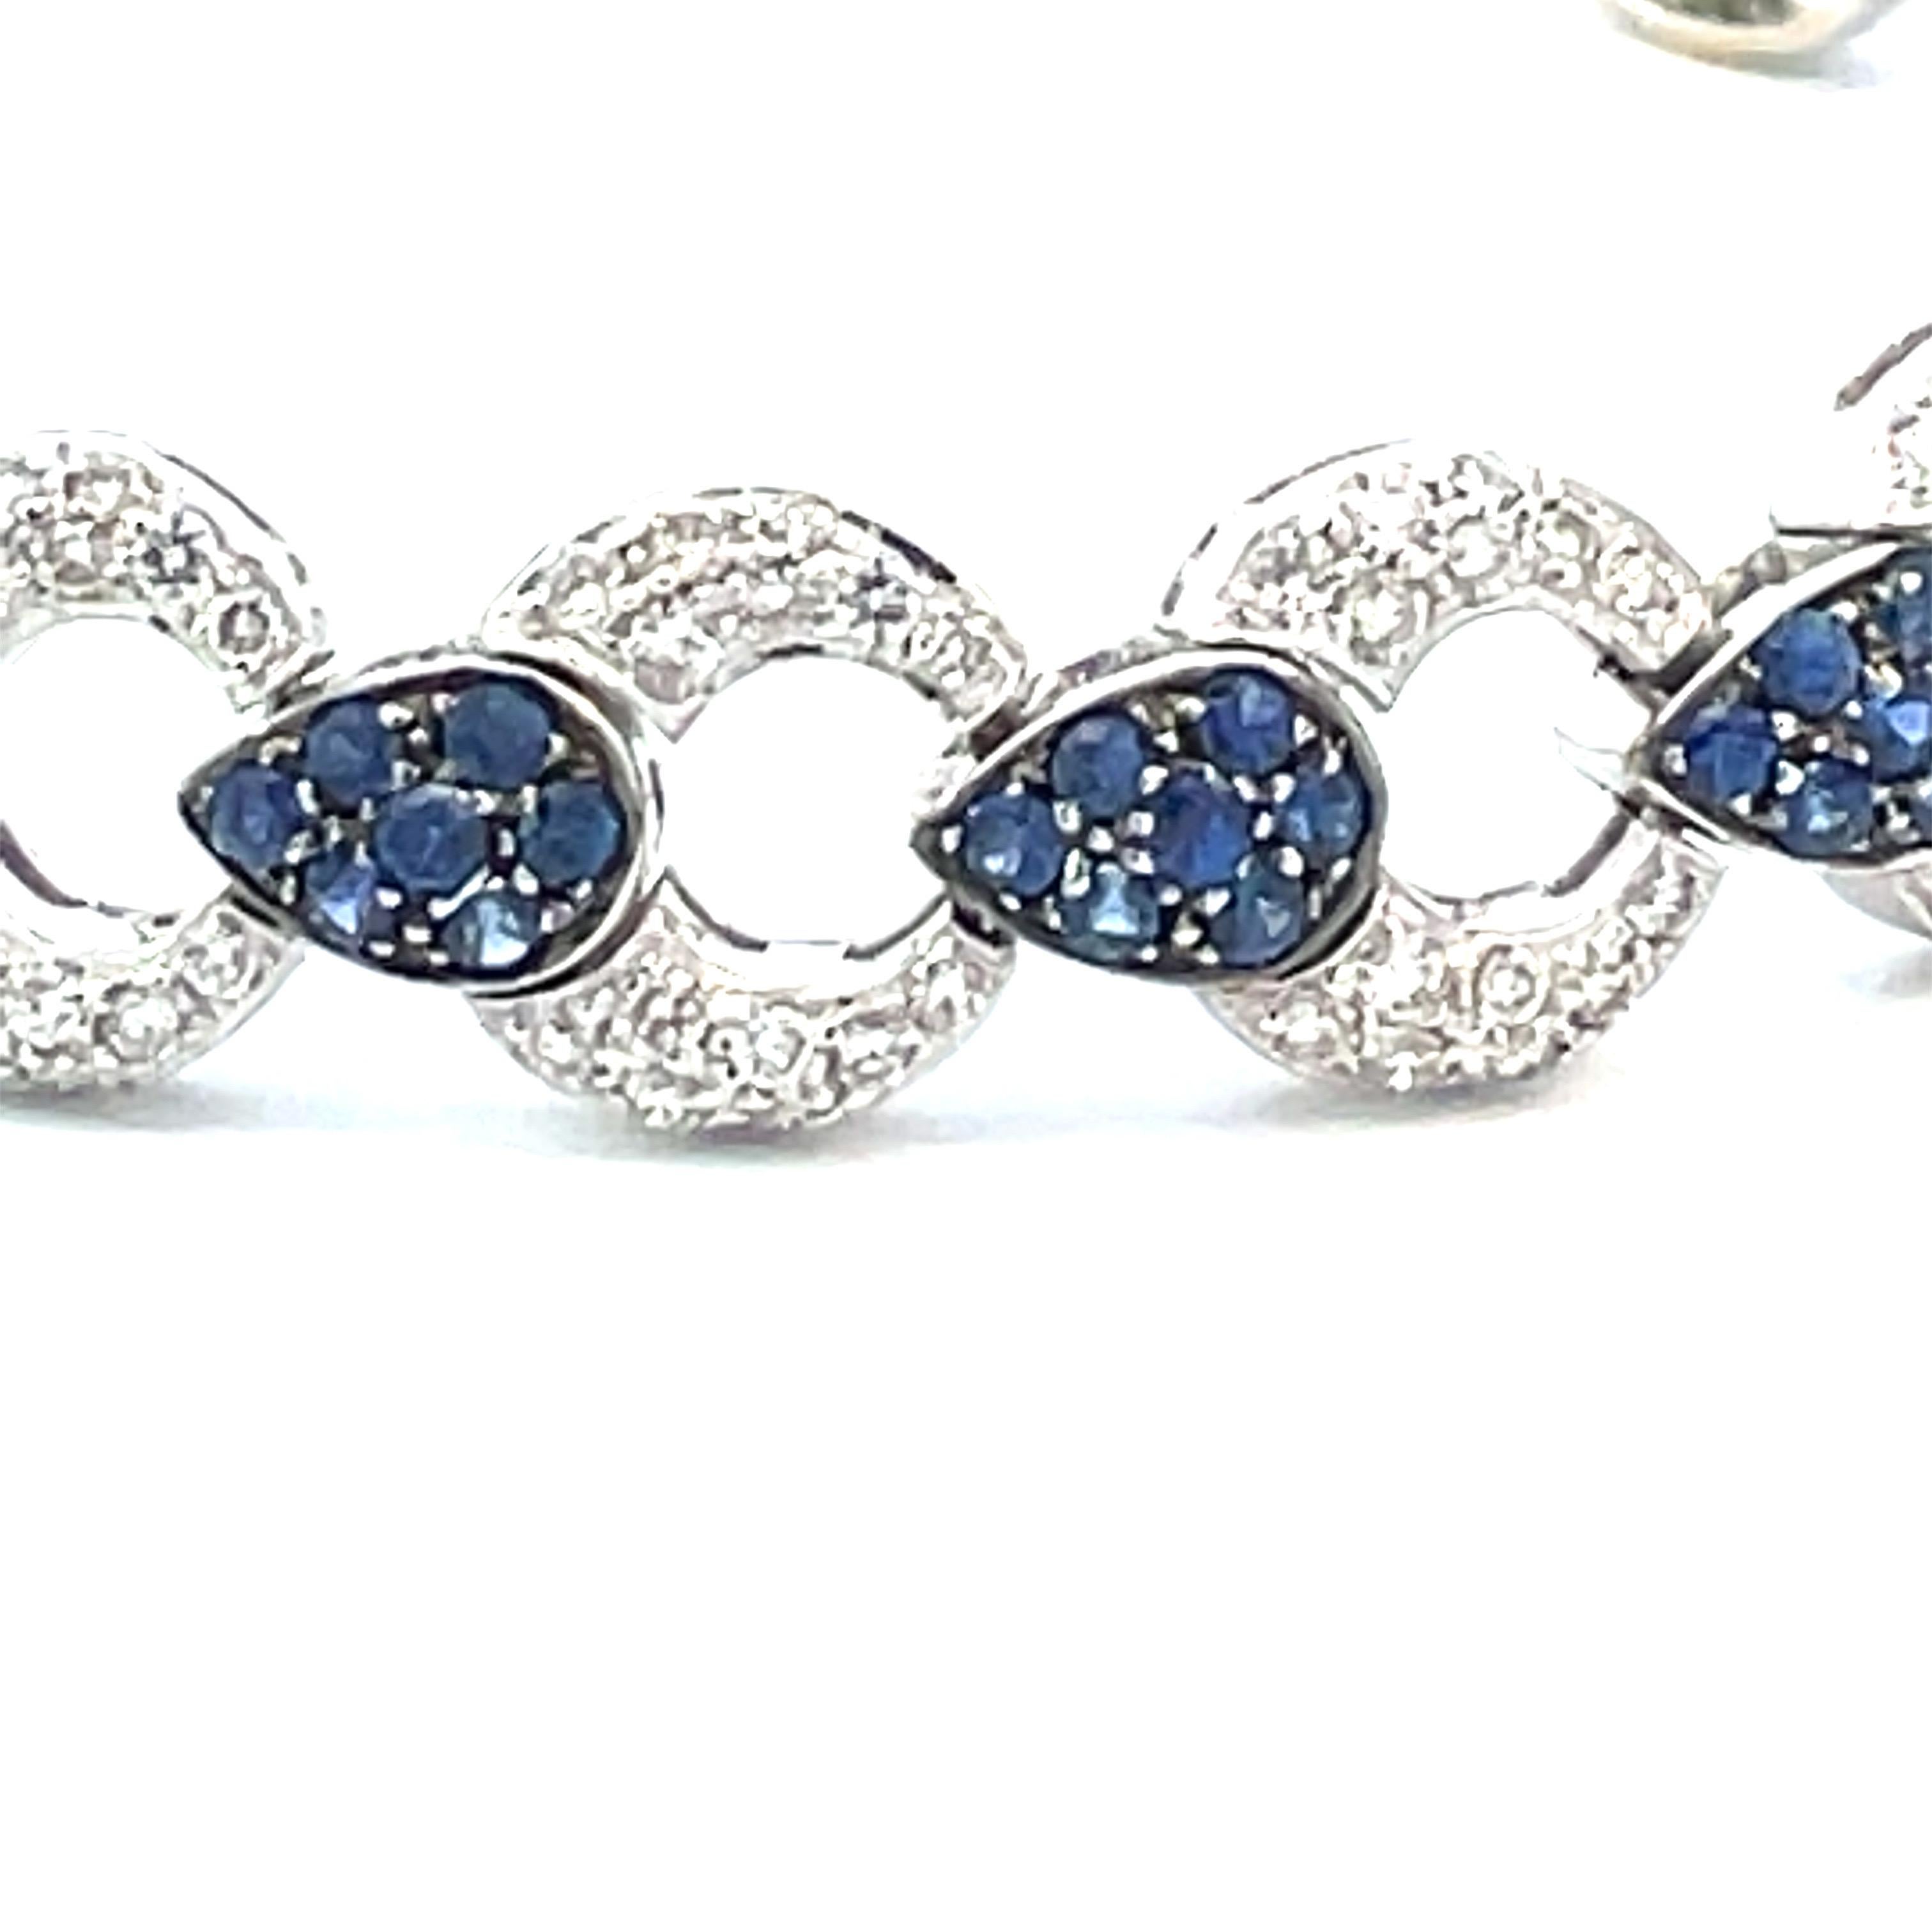 Contemporary Pave Link Bracelet With Natural Blue Sapphires & Diamonds in 18 Karat White Gold For Sale